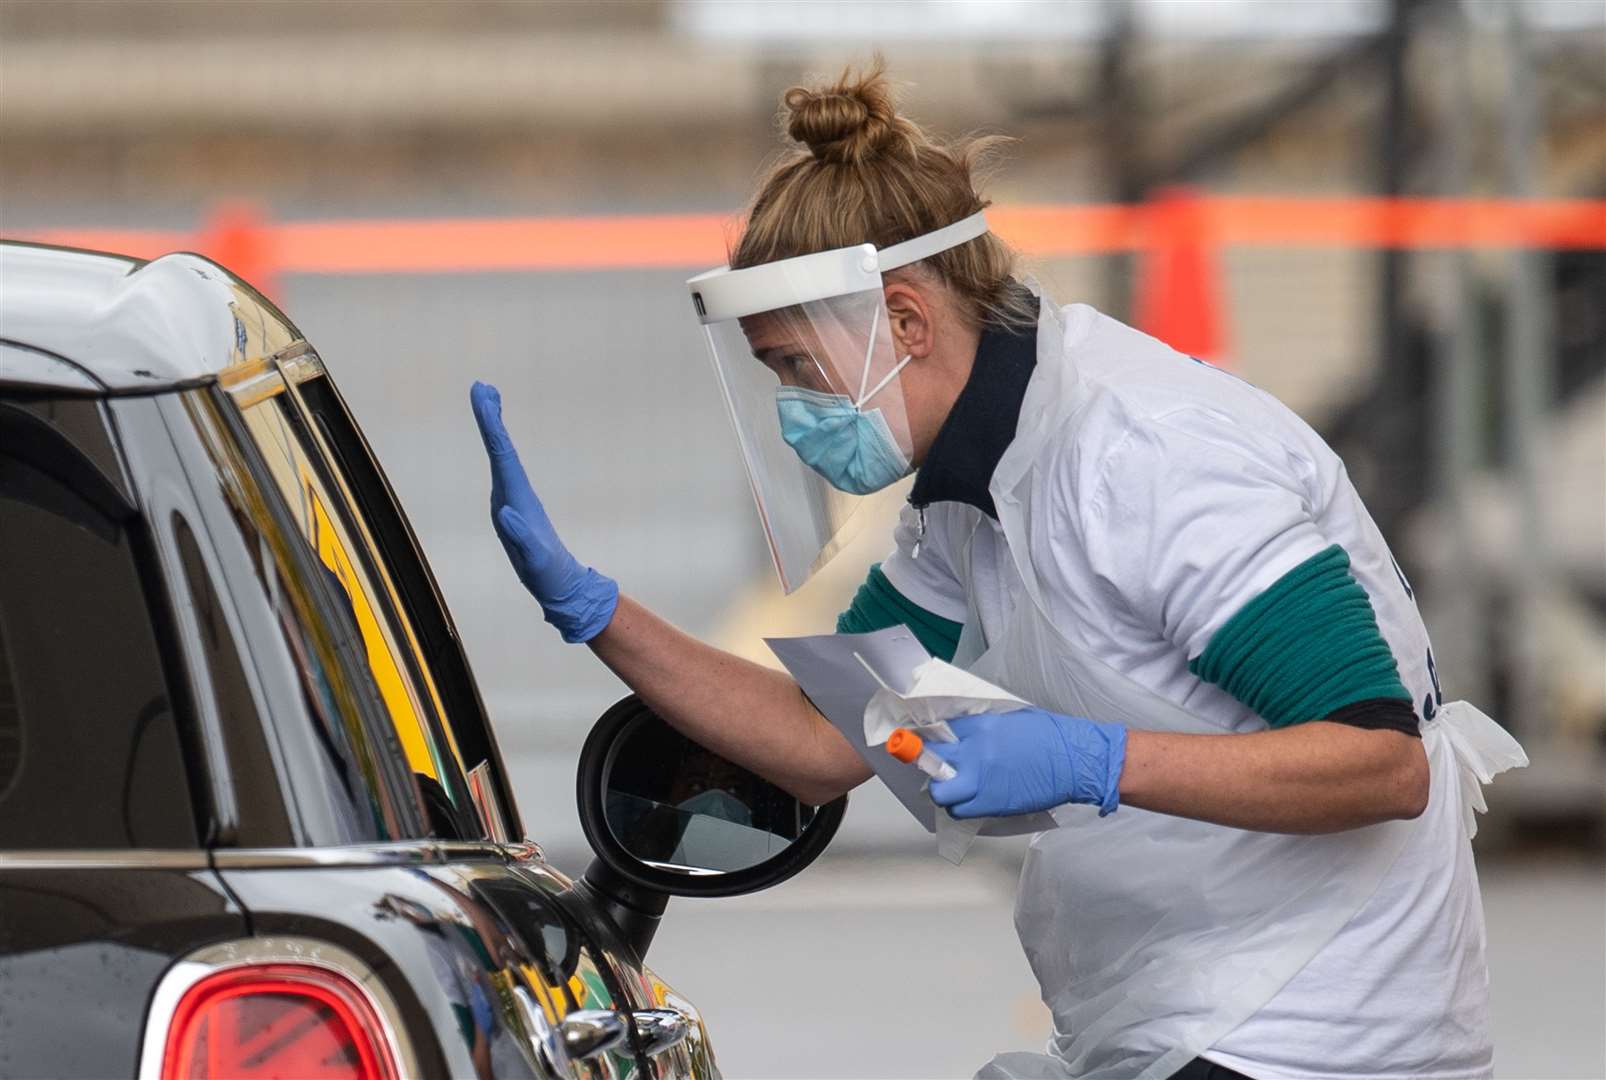 Staff collect samples at a drive-through test centre (Joe Giddens/PA)